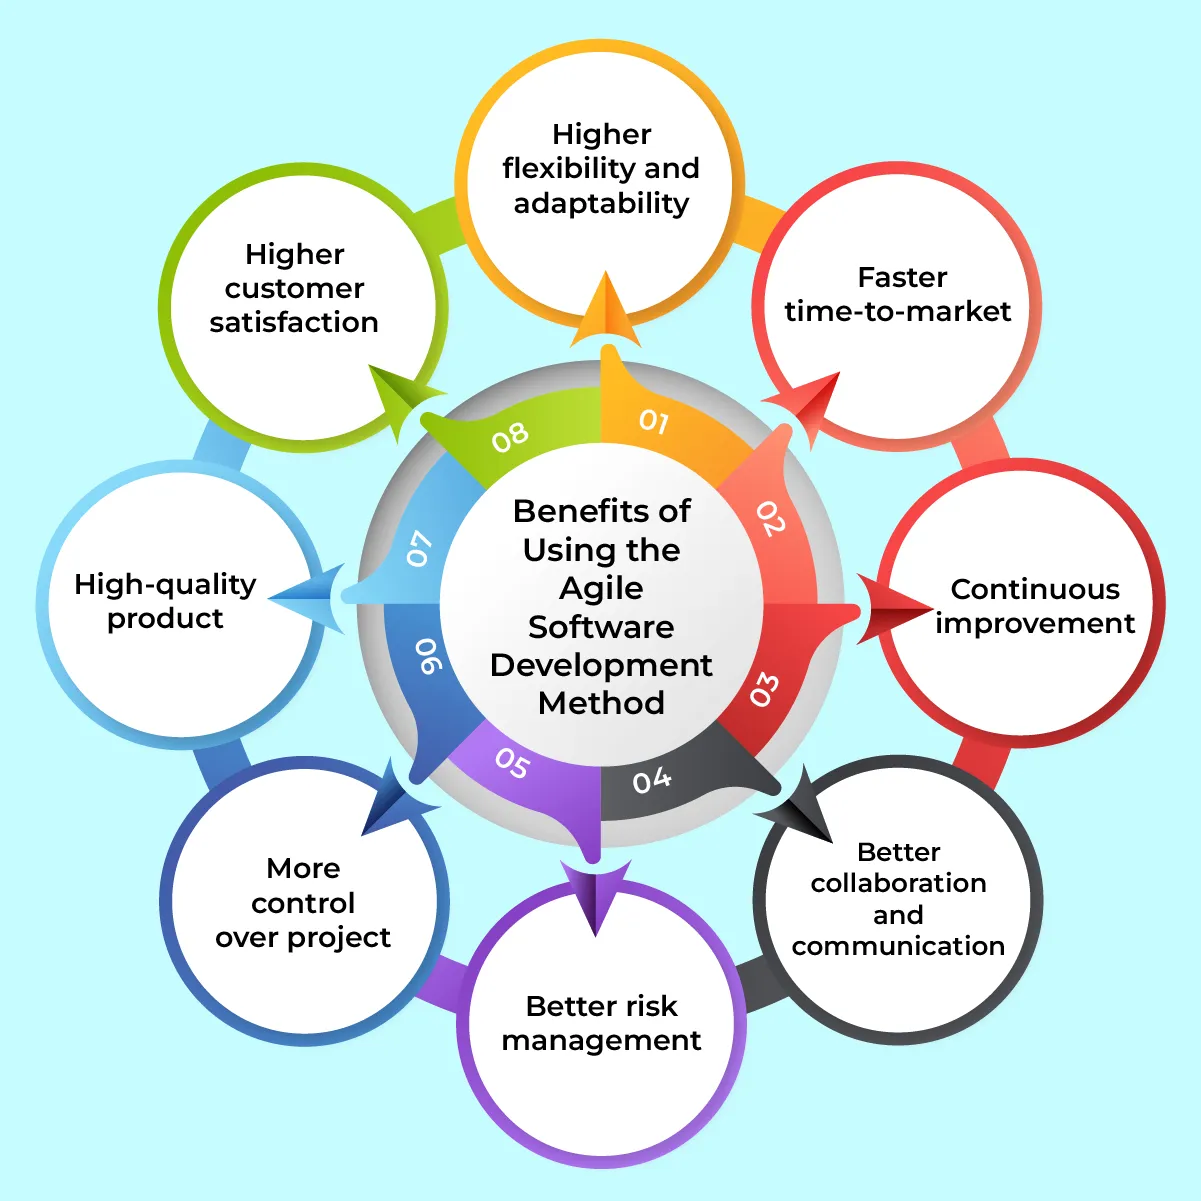 A Visual representation of 8 benefits of using the Agile Software Development Method.